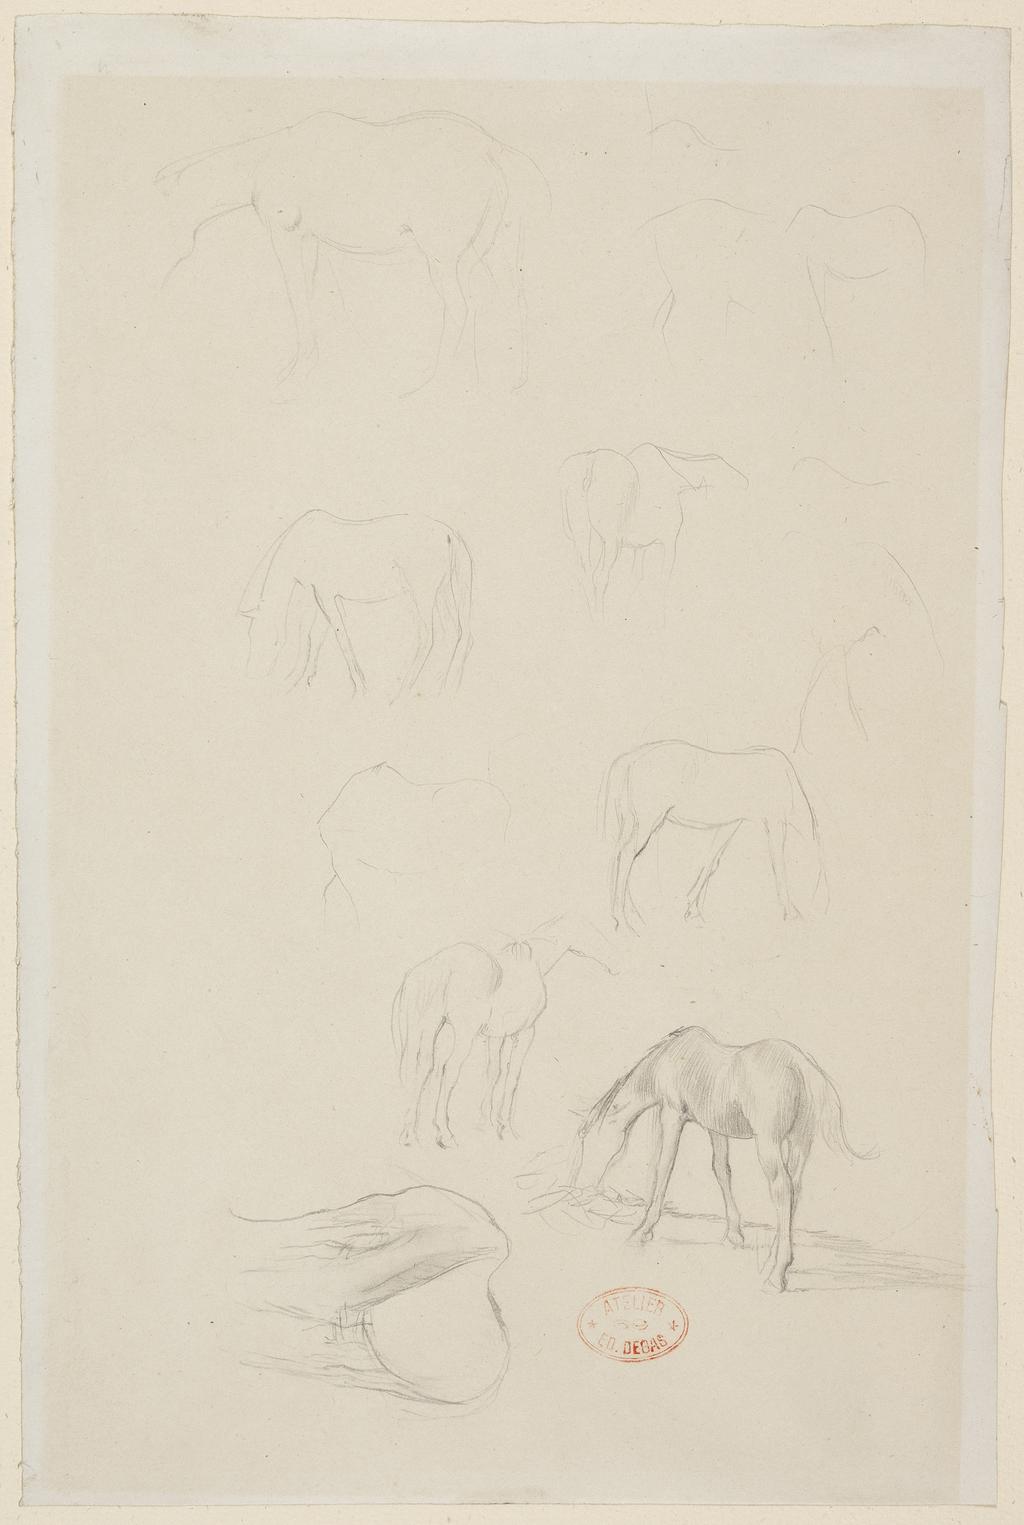 An image of Studies of a pony. Degas, Edgar (French, 1834-1917). Graphite on paper, height 285 mm, width 189 mm, circa 1871. Notes: or perhaps a study for Deux chevaud au Pâturage.